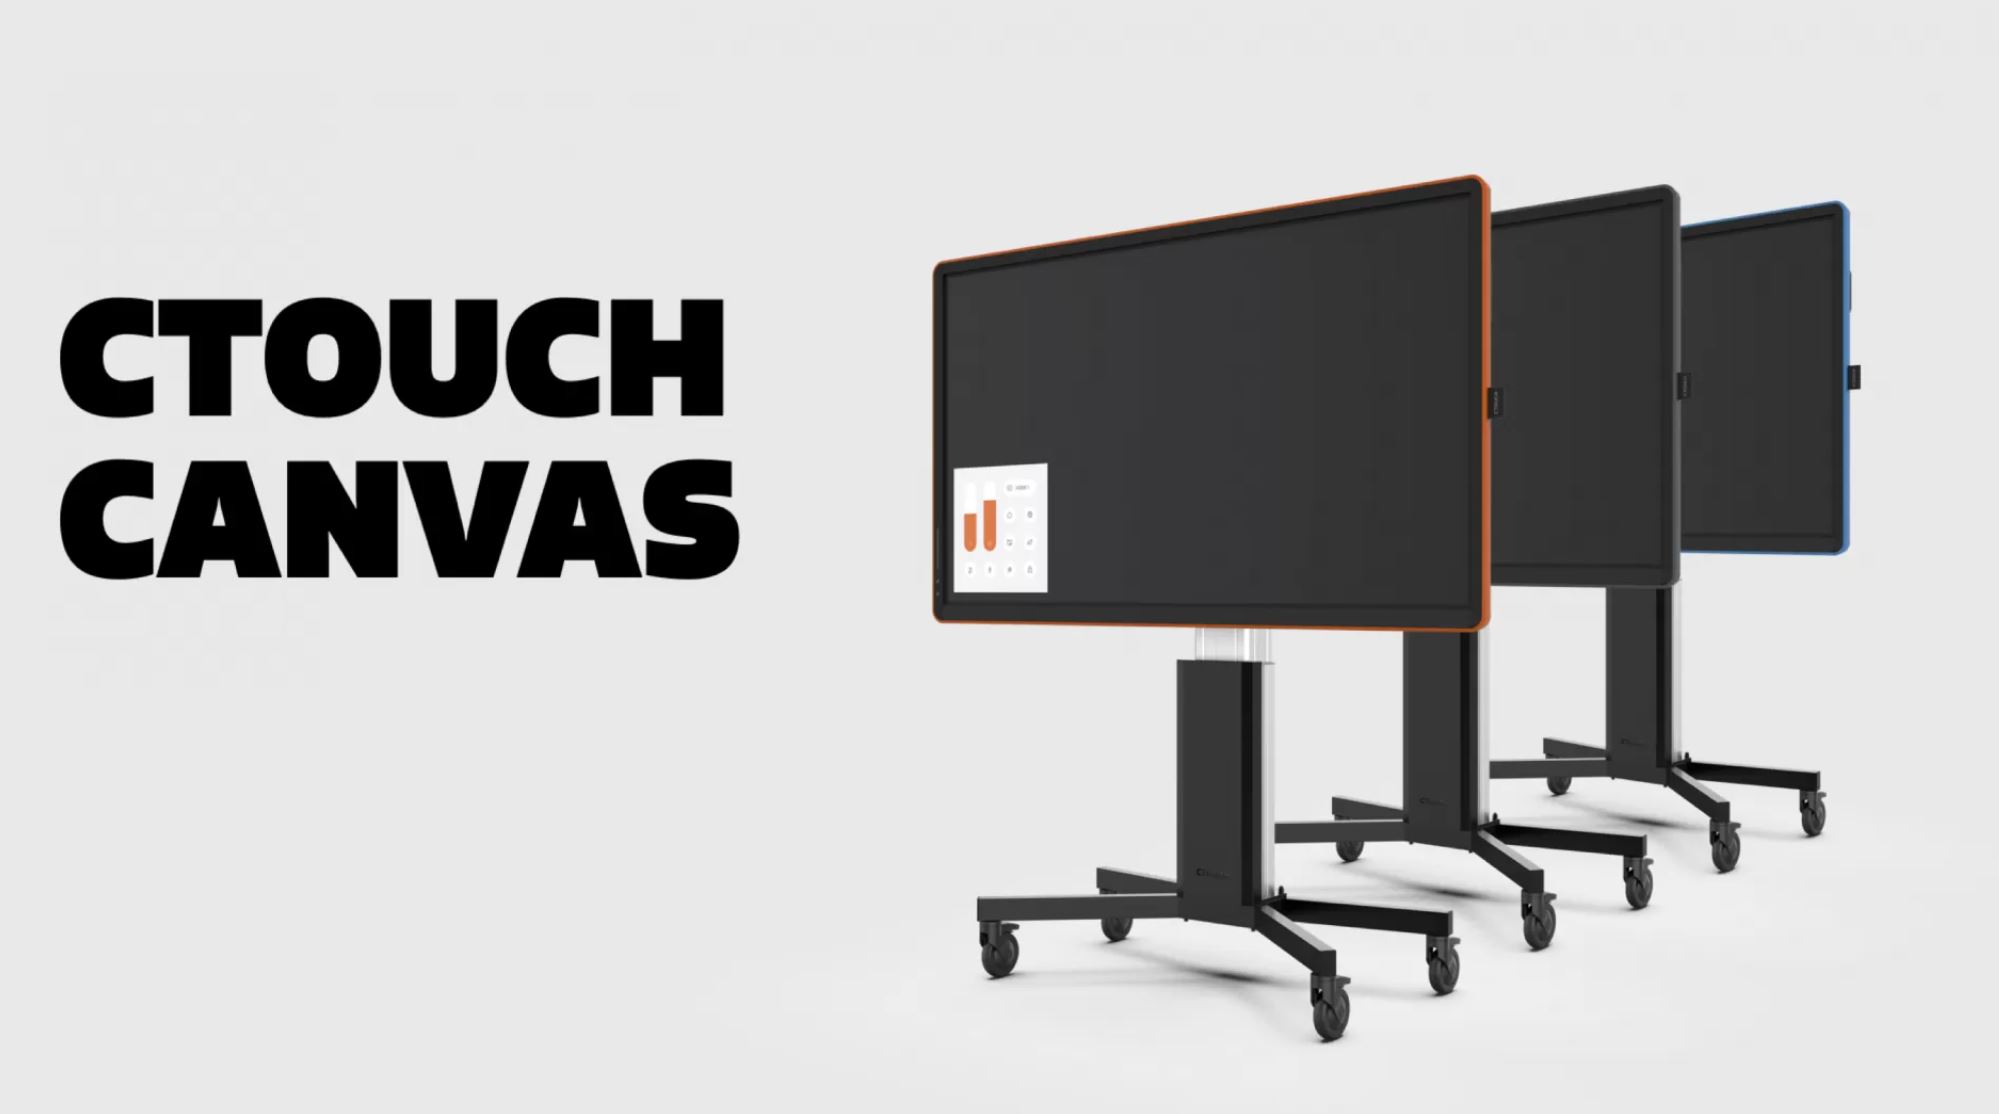 CTOUCH Canvas 55 - Midnight Grey - 55 inch - 350 cd/m² - Ultra-HD - 4K - 3840x2160 - NO-OS operating system - 20 point - Touch Display